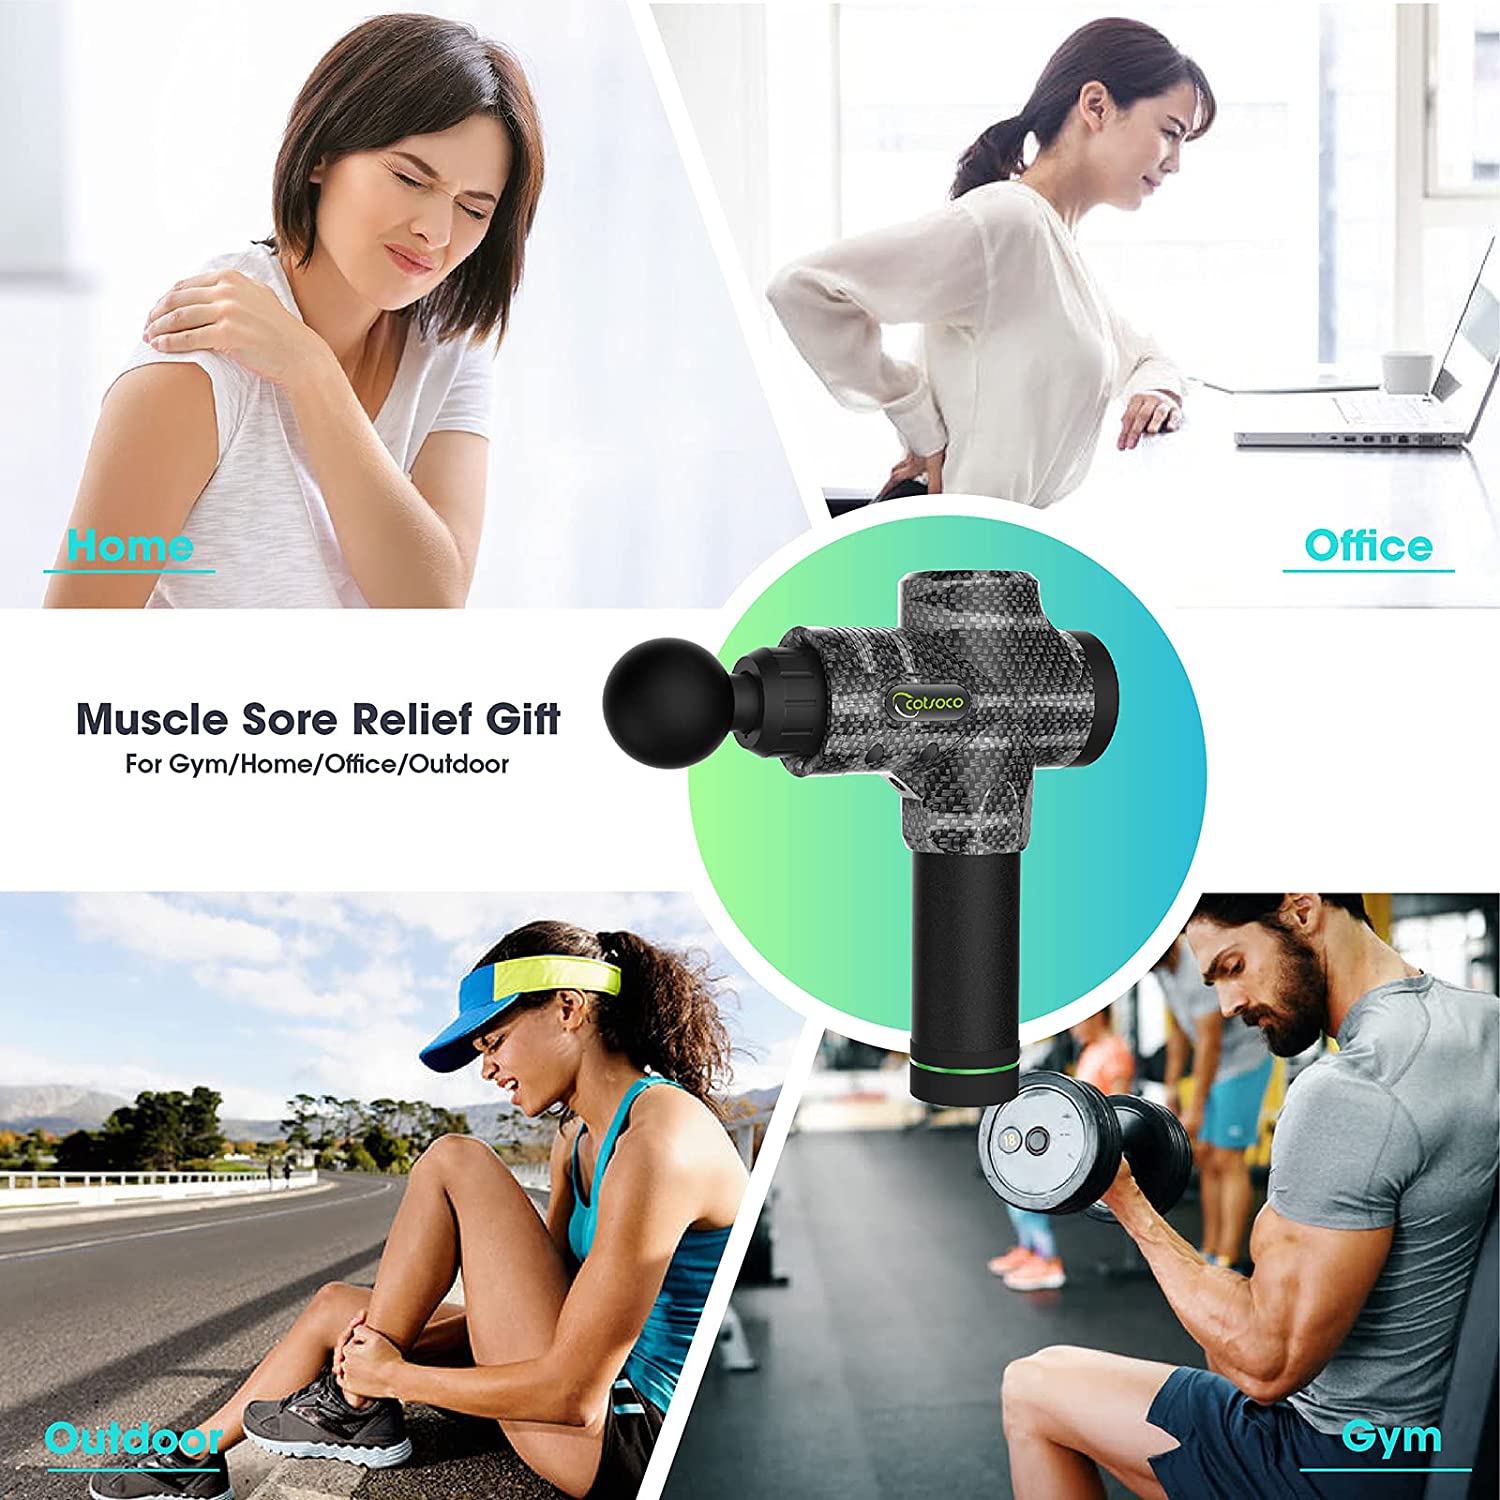 Massage Gun for Athletes,Cotsoco Professional Deep Tissue Massage Gun for Pain Relief Super Quiet Electric Massager with 10 Massage Heads and 30 Speeds Muscle Vibration Massager